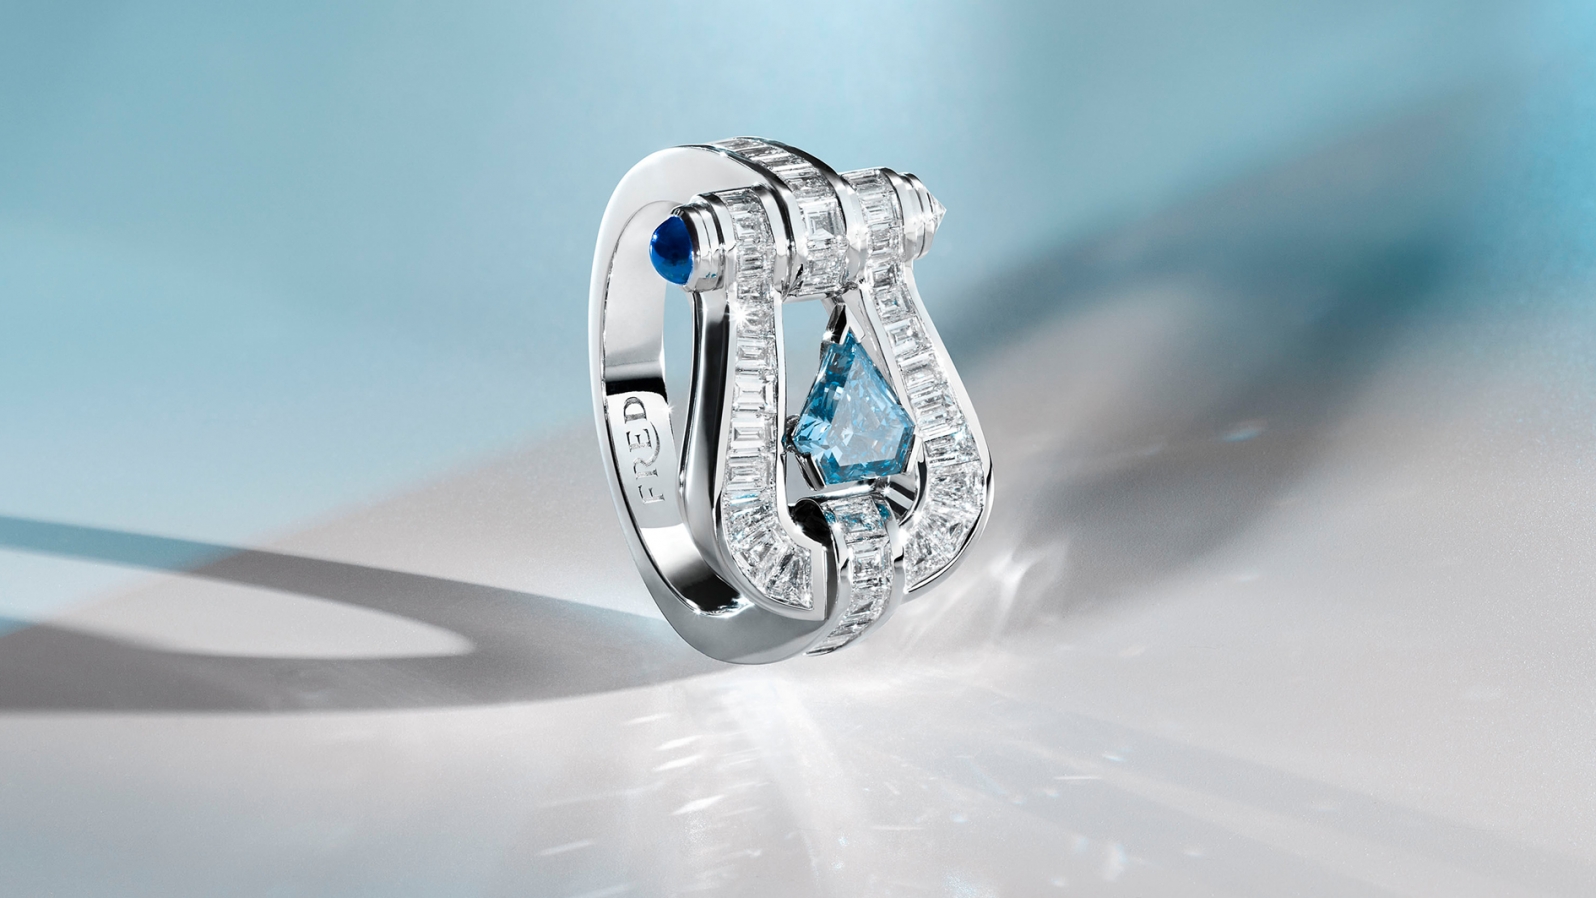 FRED unveils Audacious Blue, the first lab-grown diamond from the